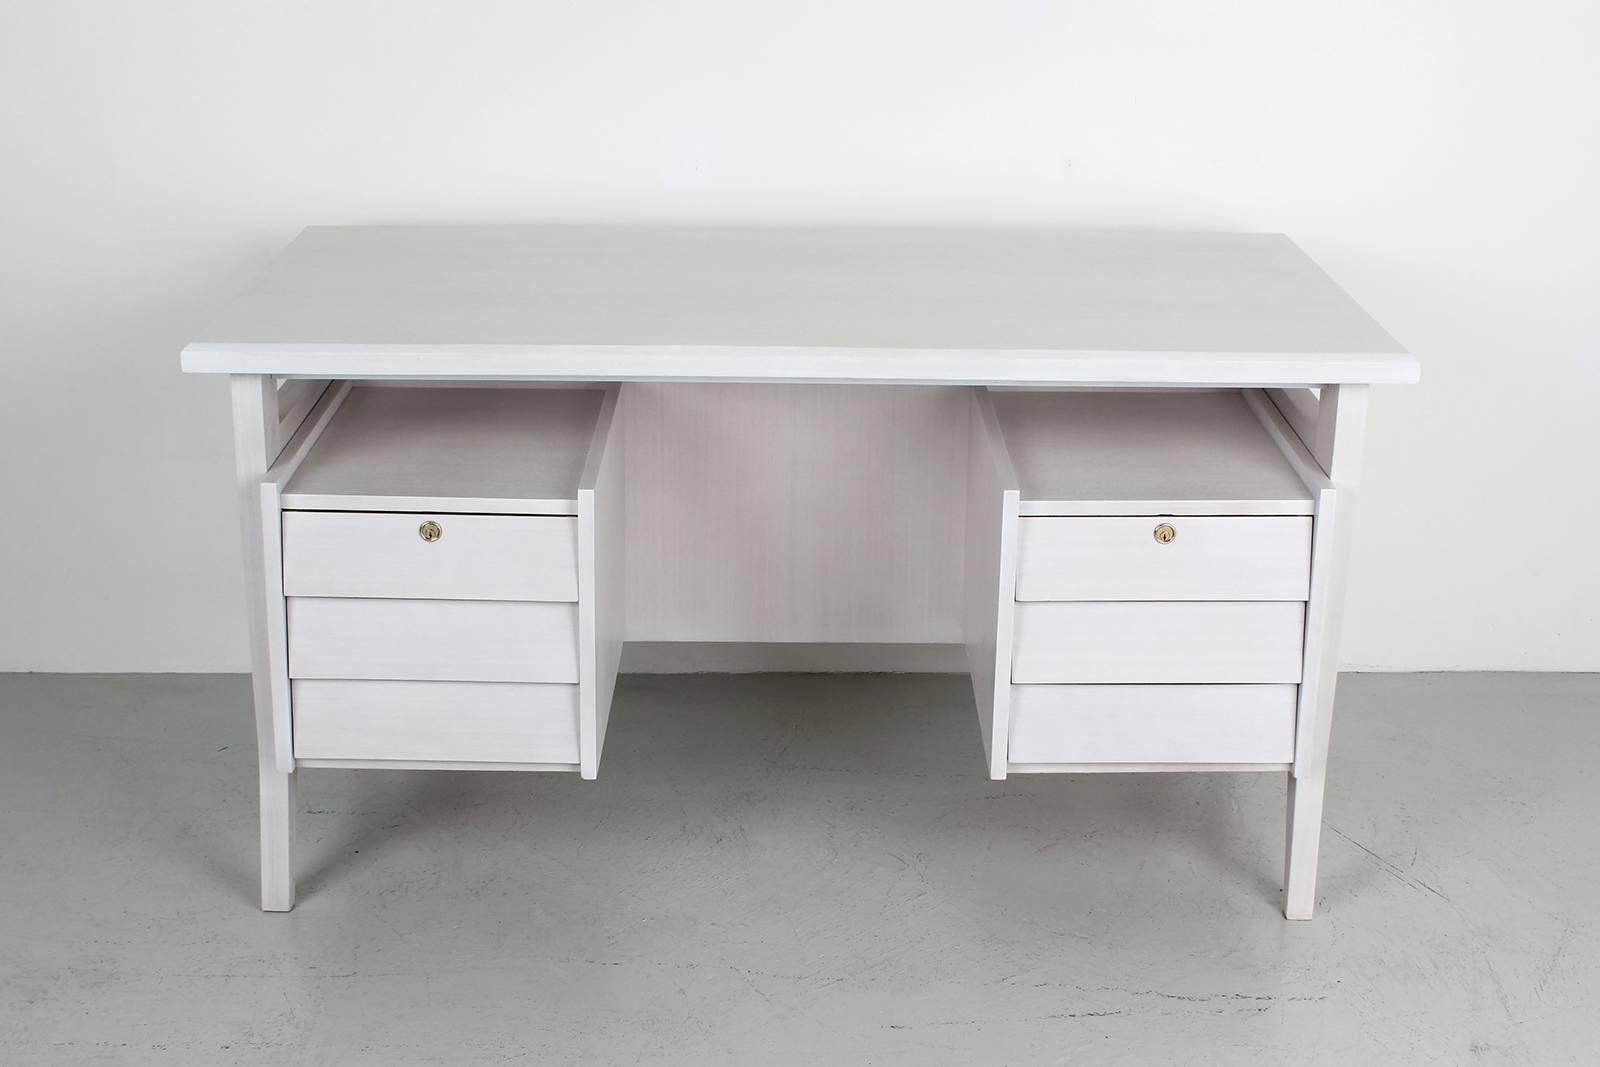 Gorgeous desk by Gio Ponti. Original brass hardware. Impressive in size and scale with pull-out drawers flanking each side of the desk. A fantastic example of Gio Ponti design. A variant of 1940s design for University of Padua, later adapted for the